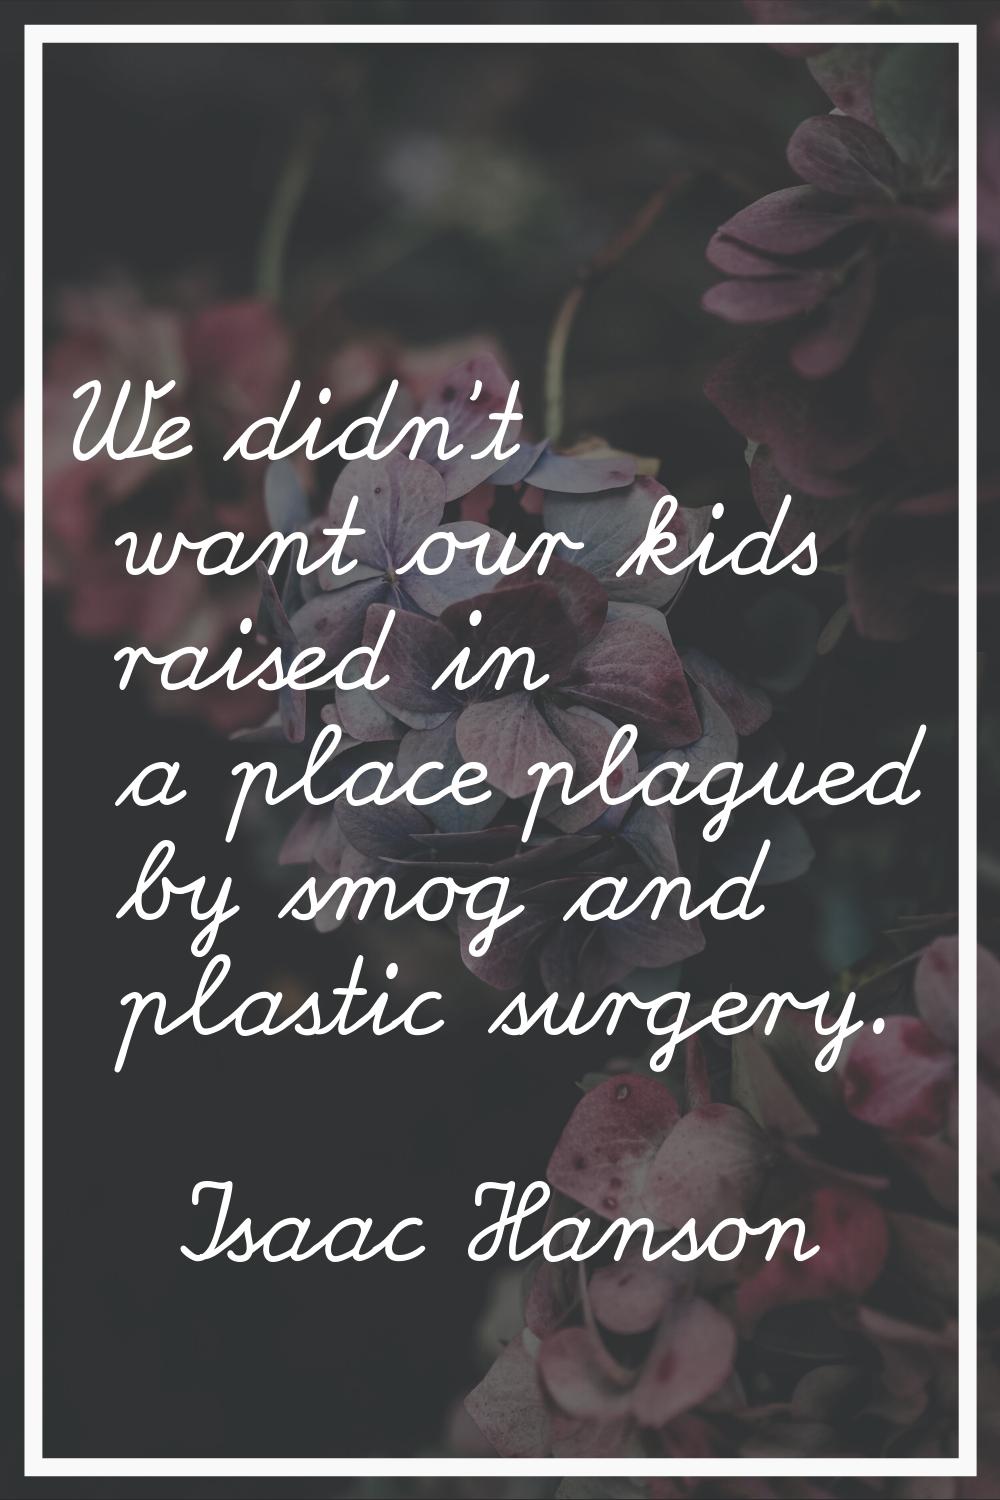 We didn't want our kids raised in a place plagued by smog and plastic surgery.